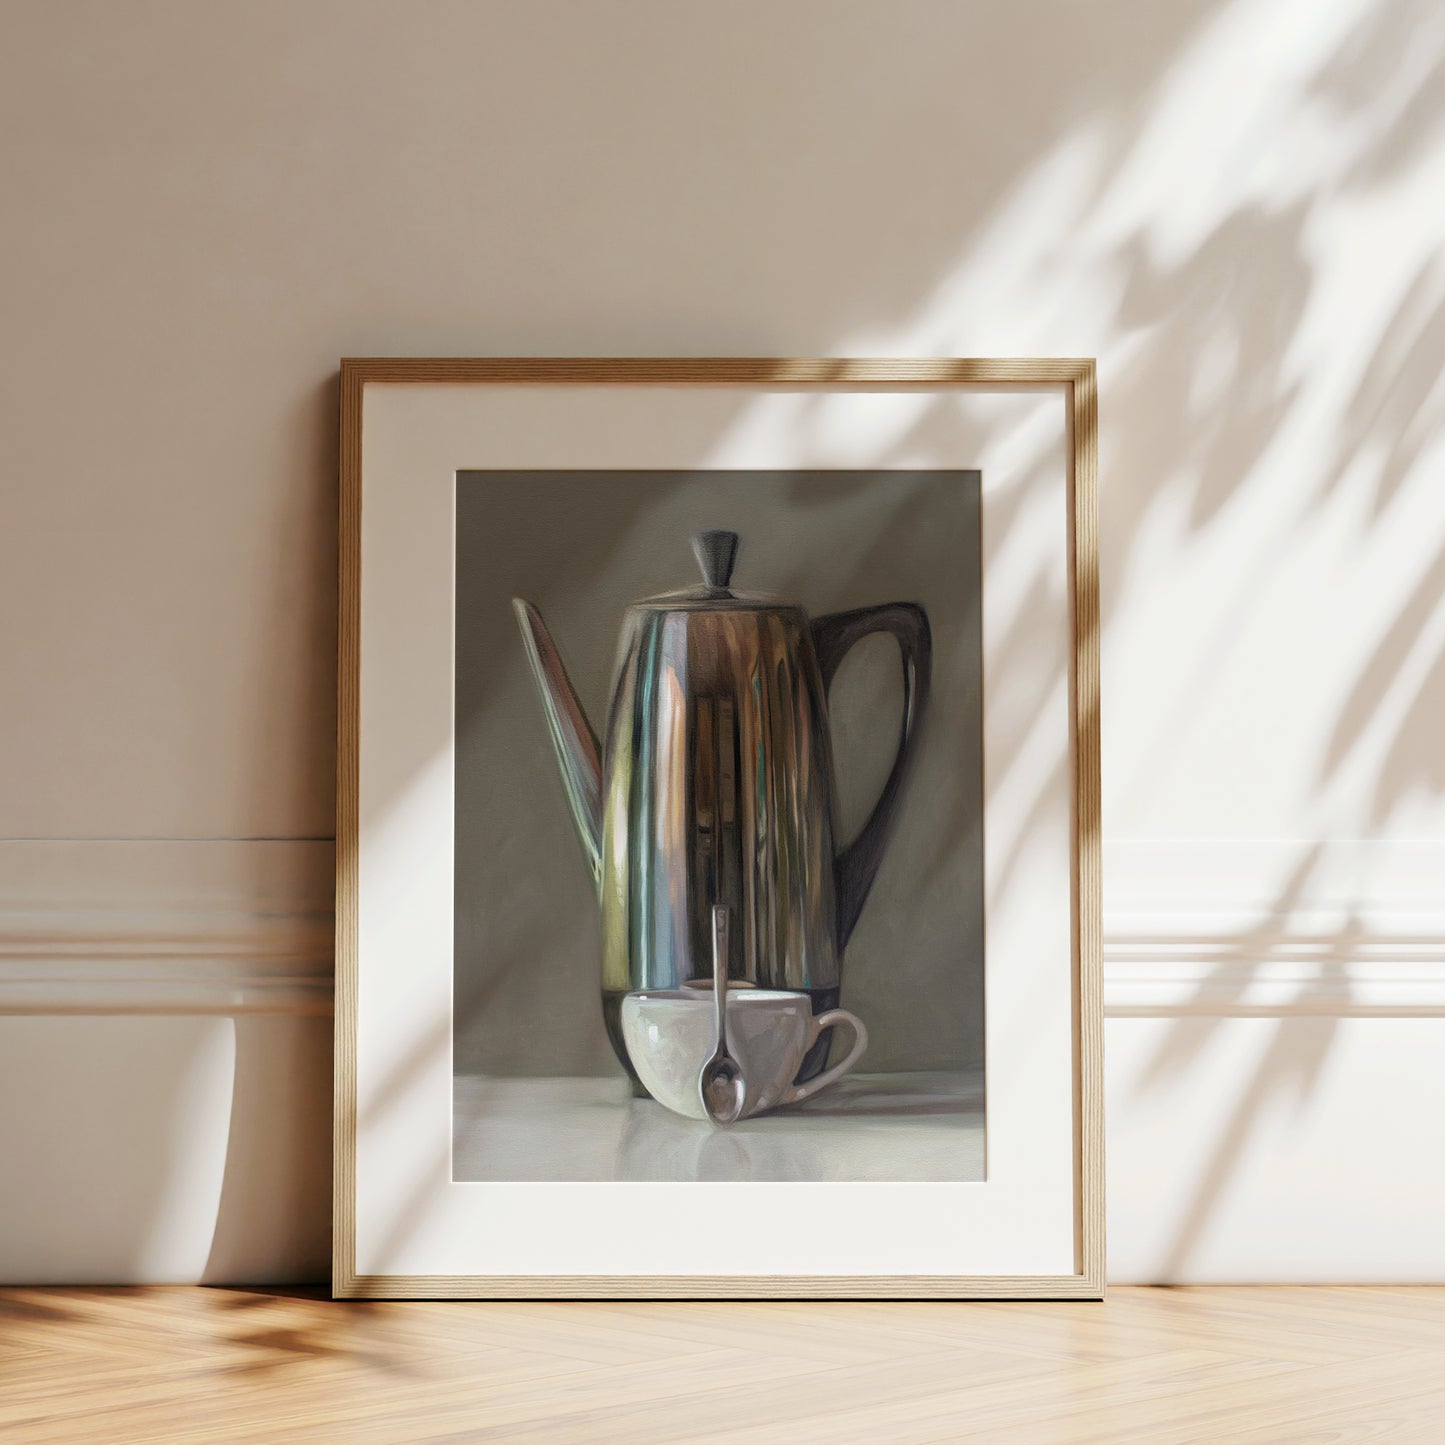 This artwork features a reflective percolator, porcelain coffee cup and small spoon resting on a light reflective surface with neutral grey tones.